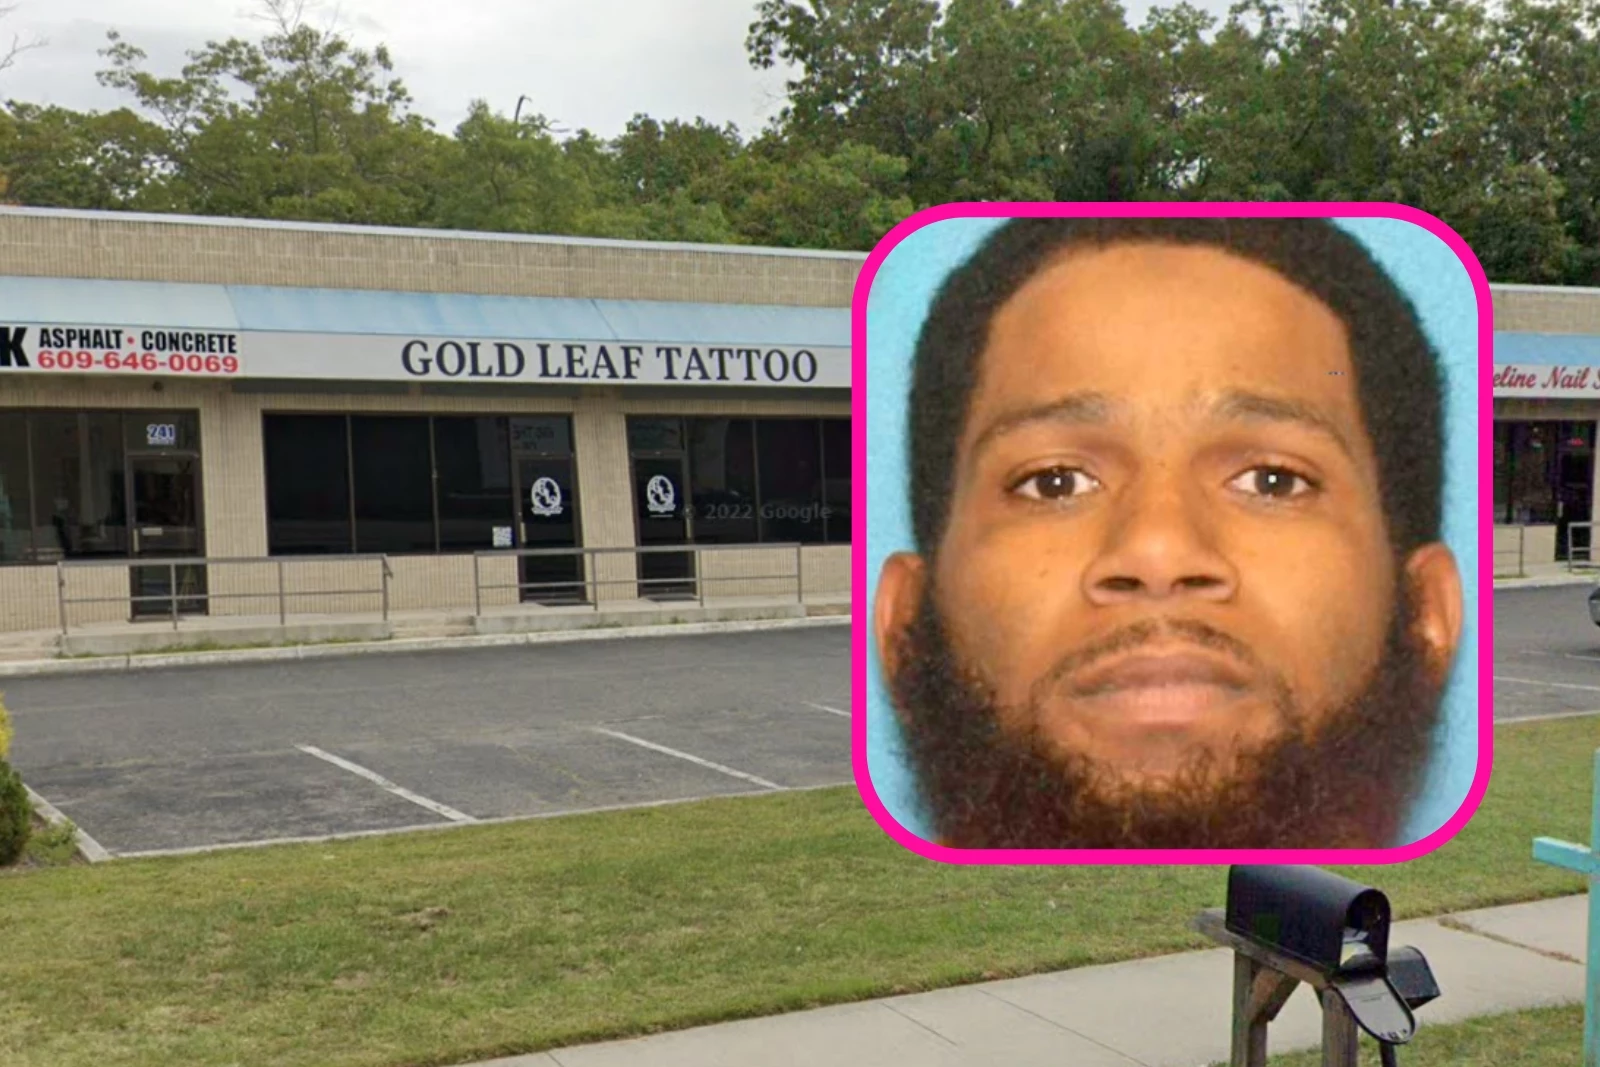 Vito C Anderson of Pleasantville NJ allegedly broke into Gold Leaf Tattoo in Galloway Township